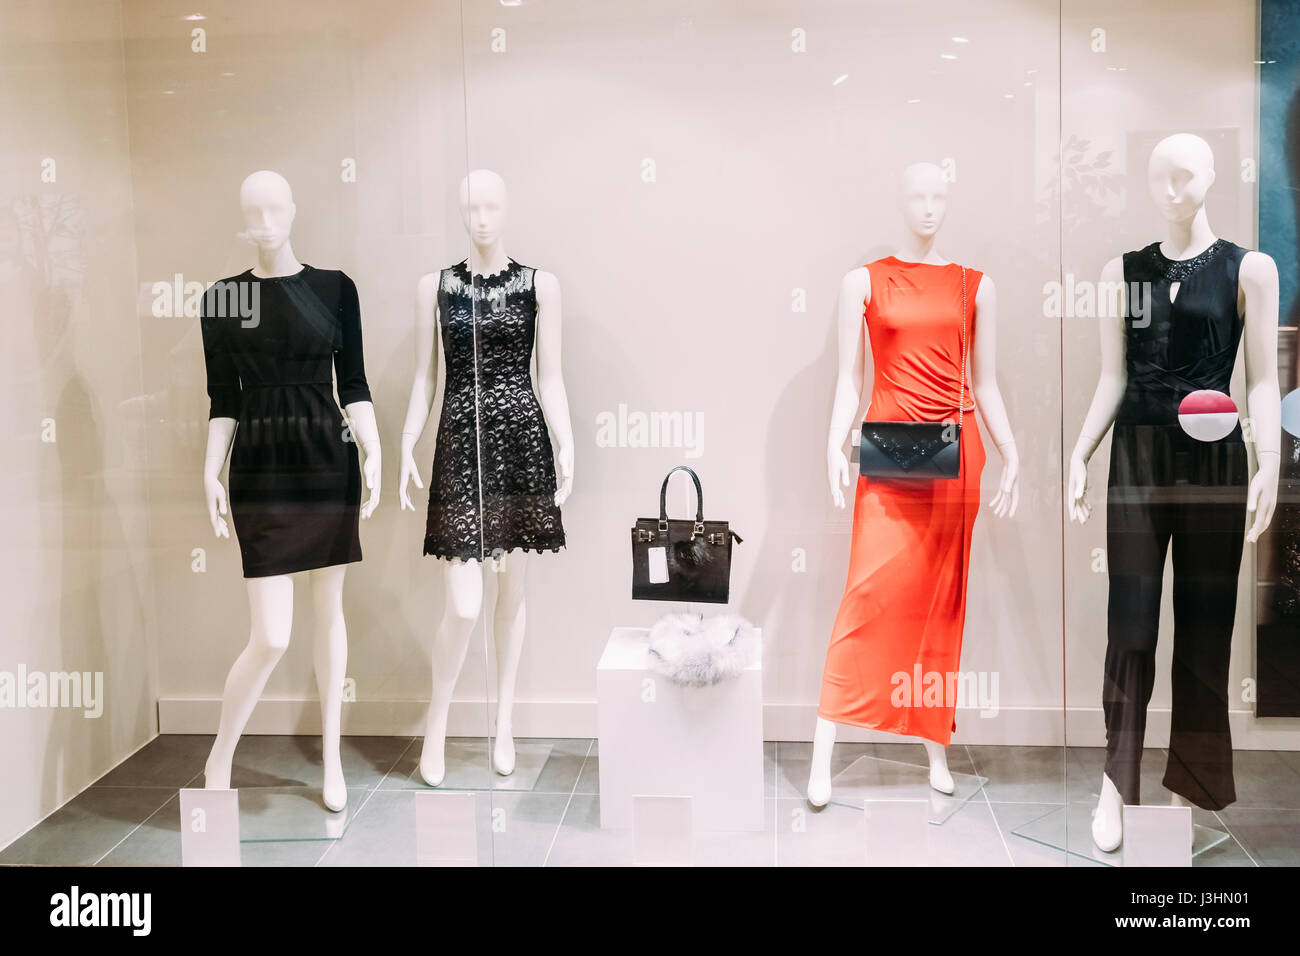 Four Mannequins Standing In Store Window Display Of Women's Casual Clothing Shop In Shopping Mall. Stock Photo